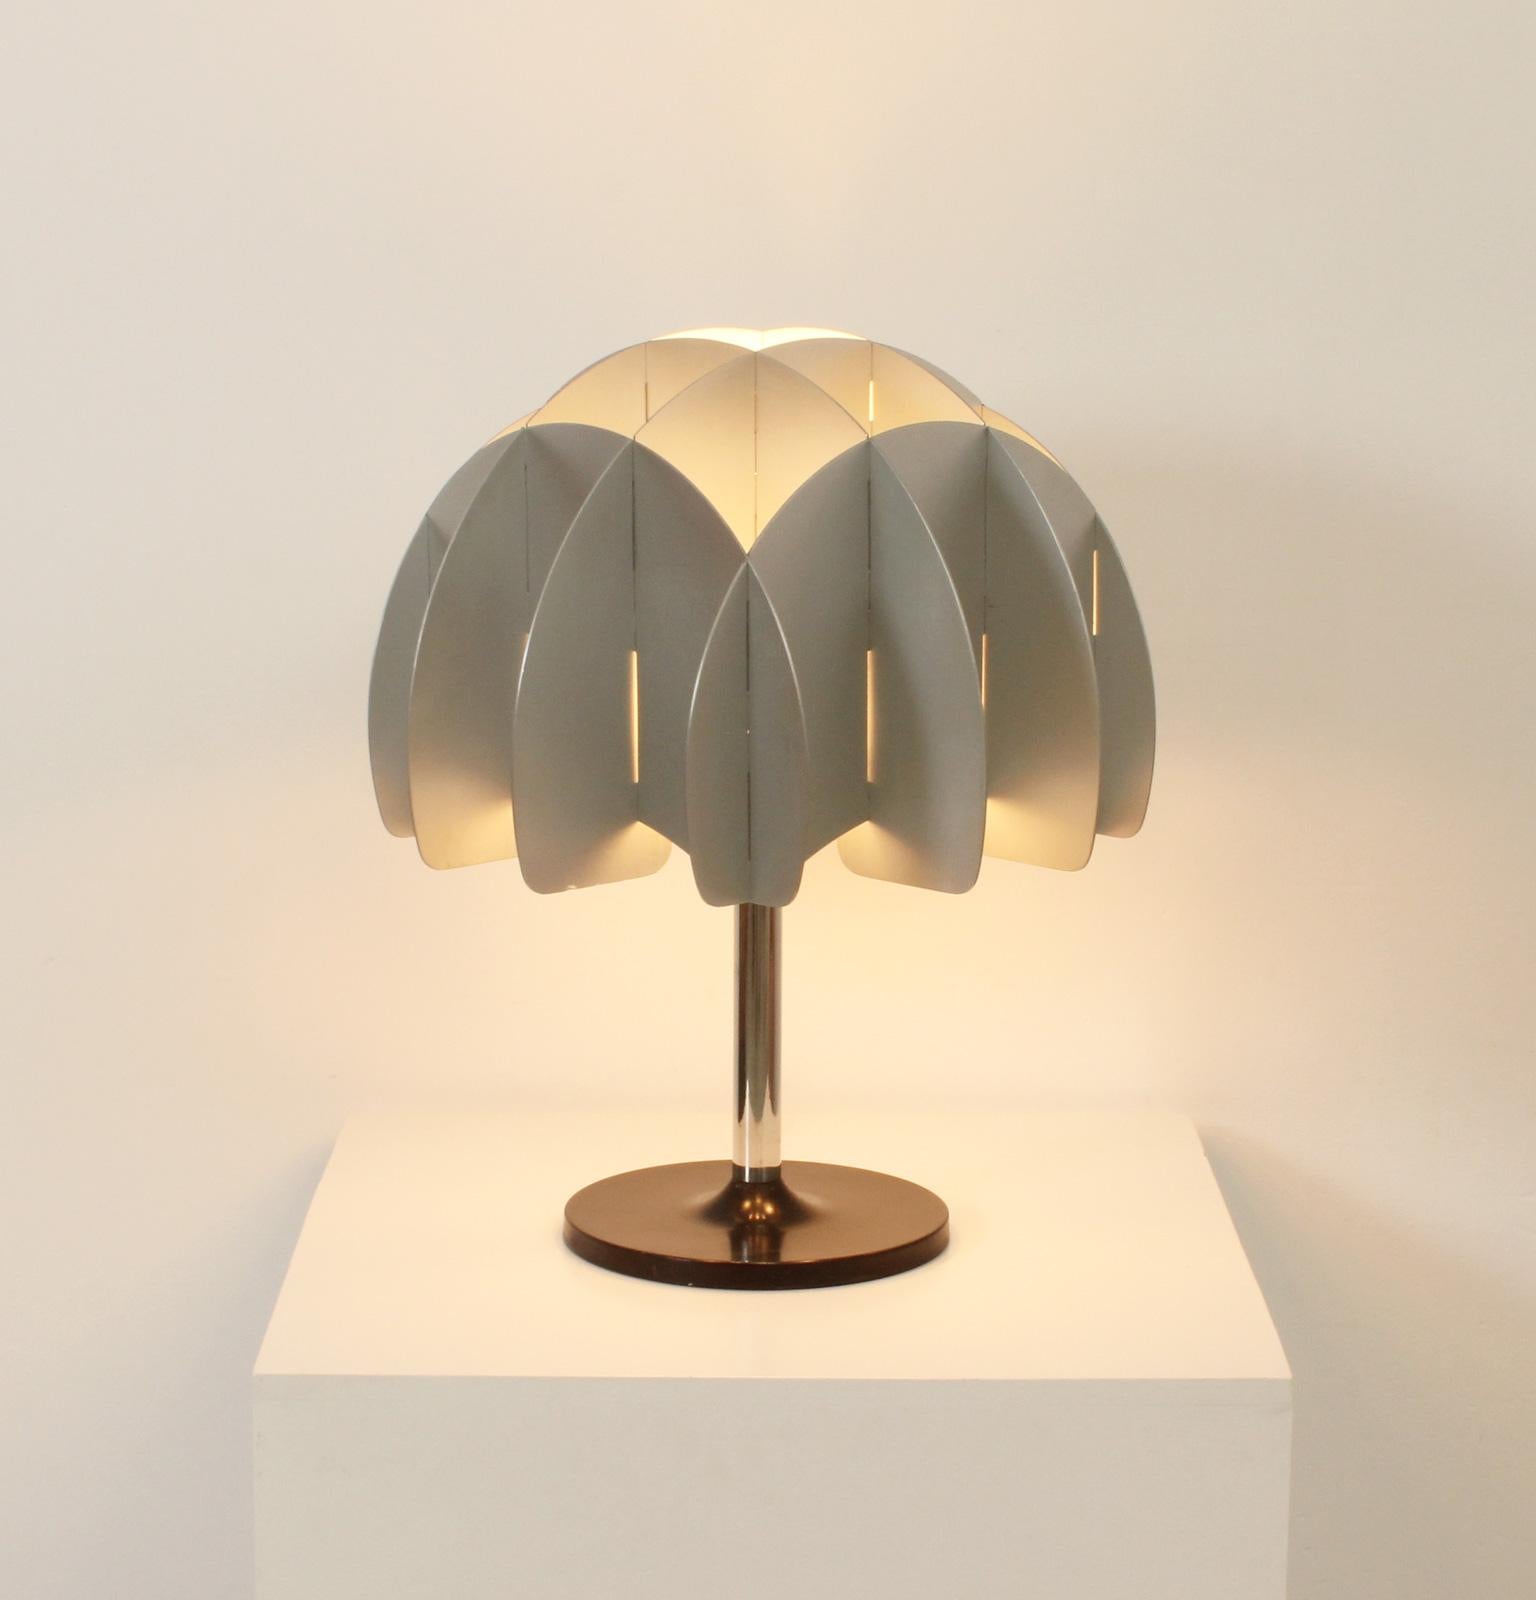 Table lamp from 1970's produced by Reggiani, Italy. Excellent work done with aluminum plates as a dome with chrome and lacquered metal base.